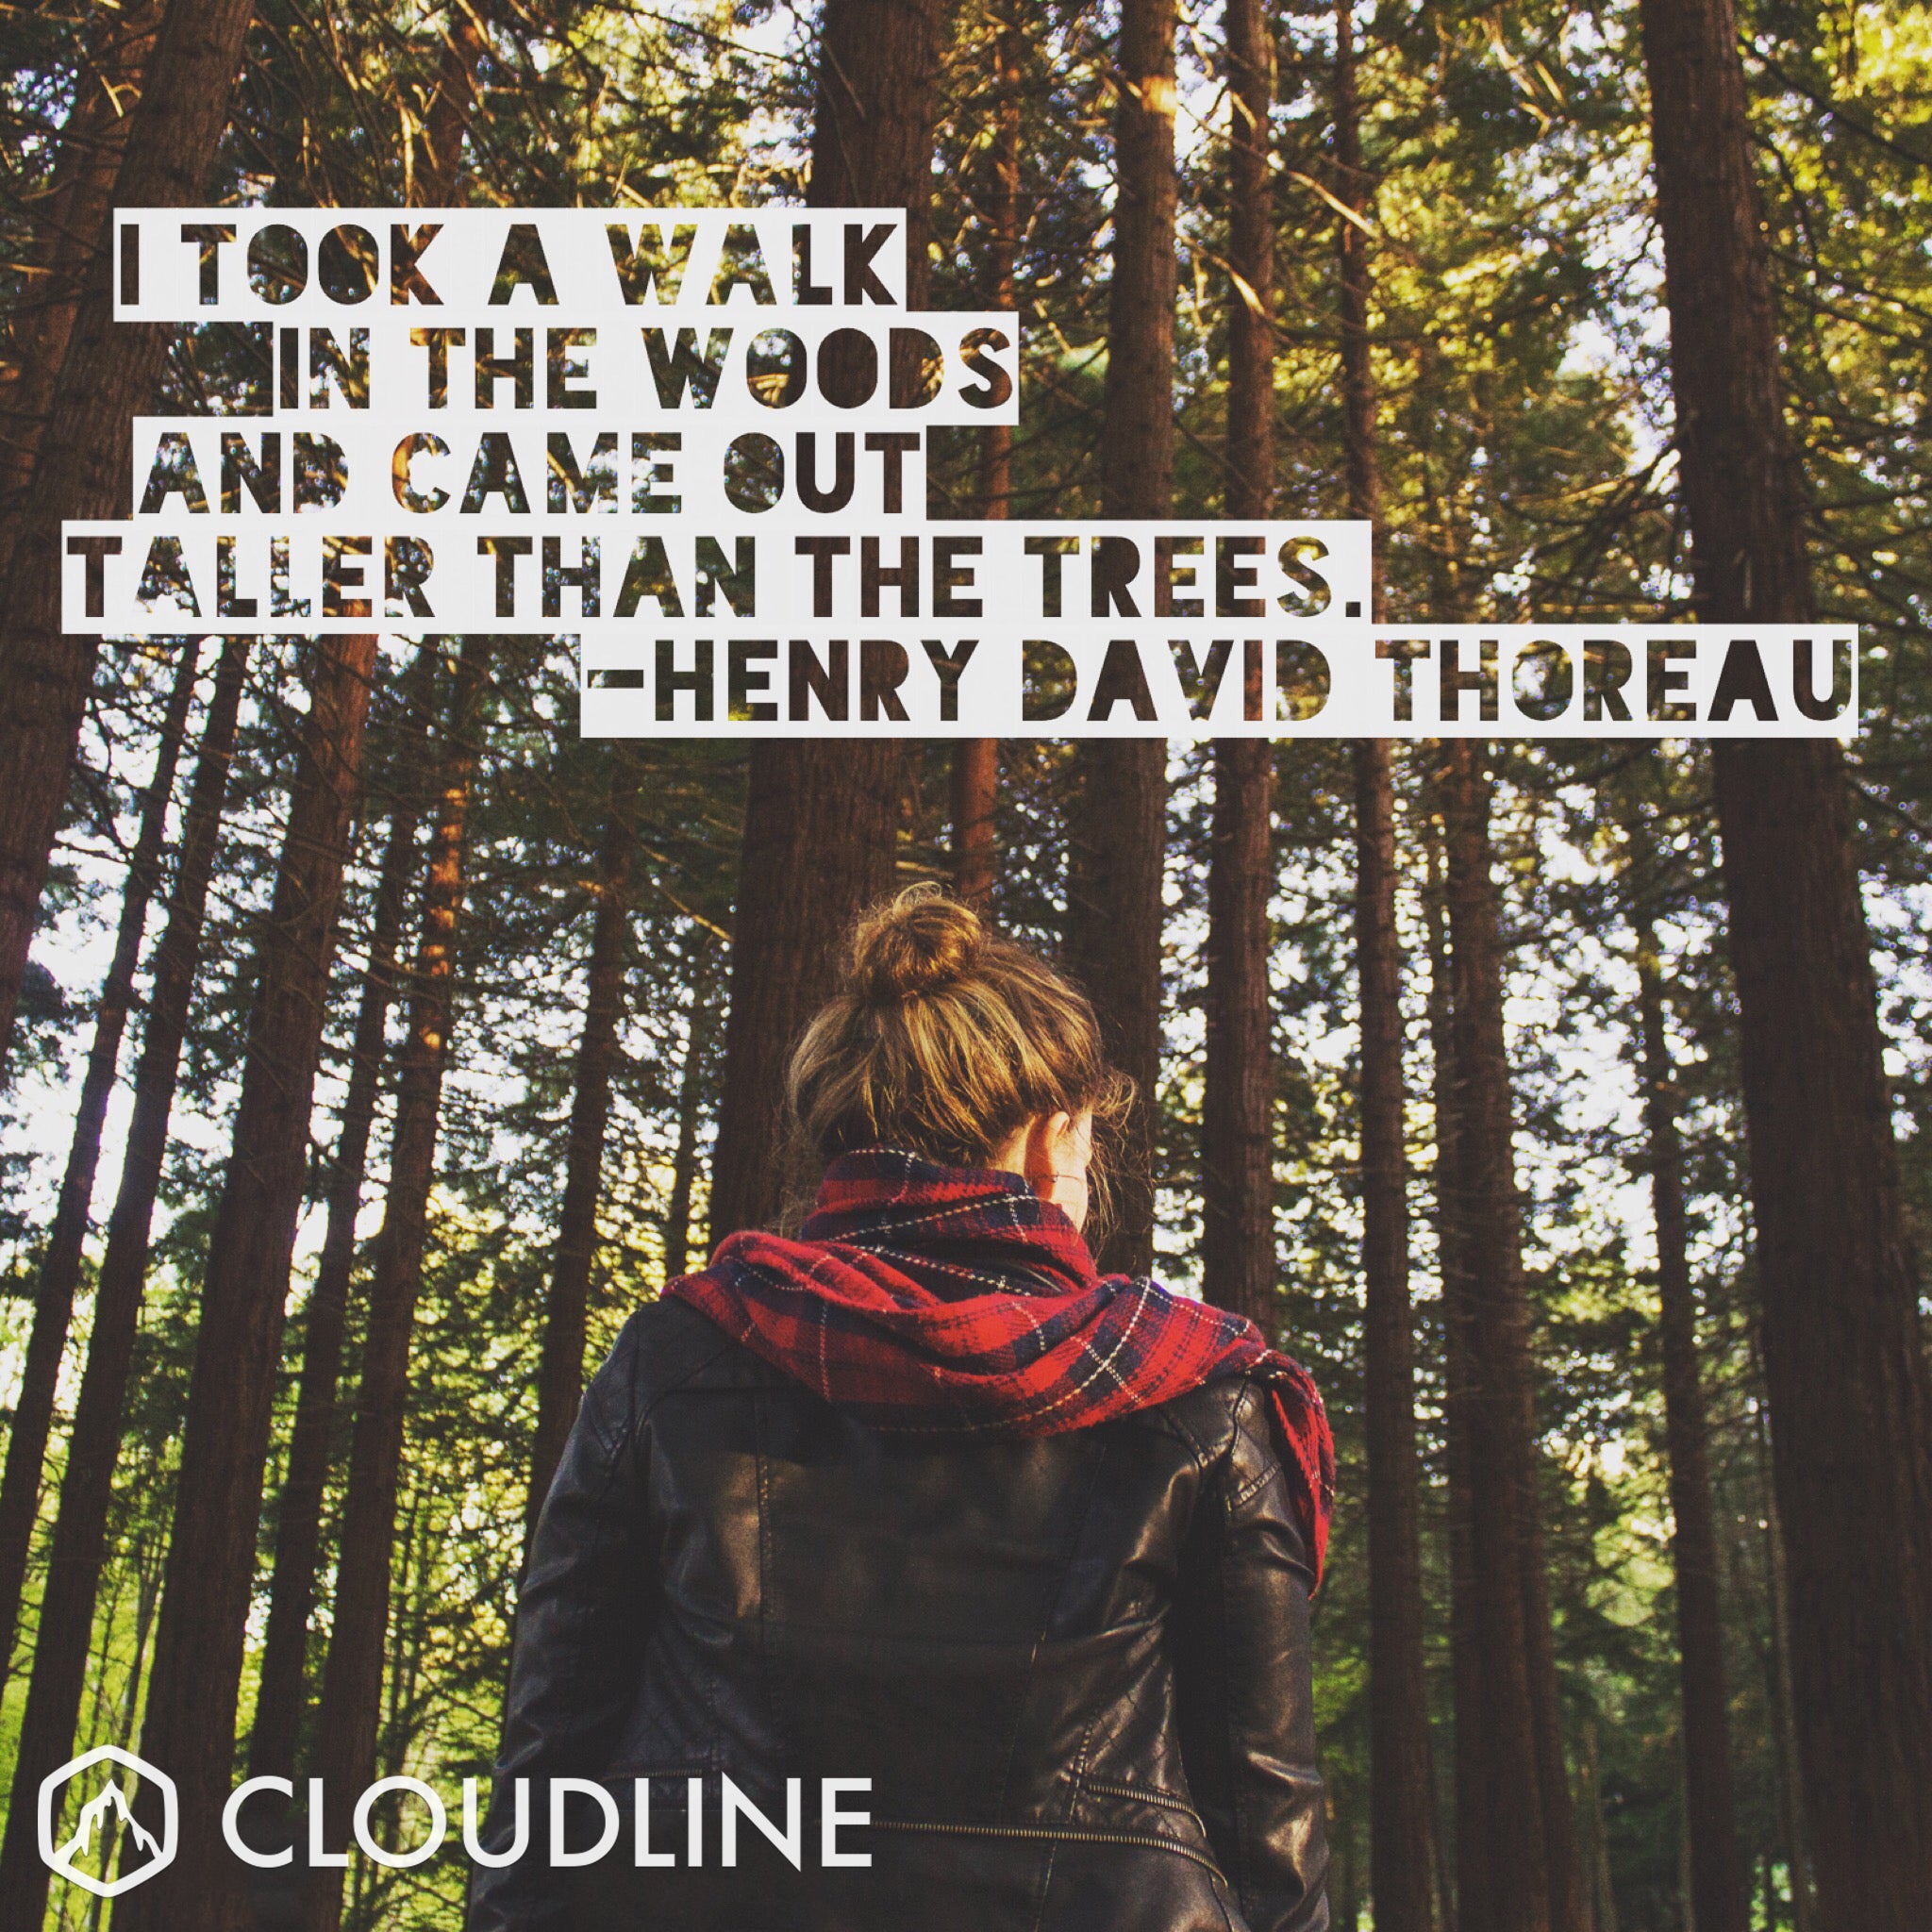 I took a walk in the woods and came out taller than the trees - Henry David Thoreau